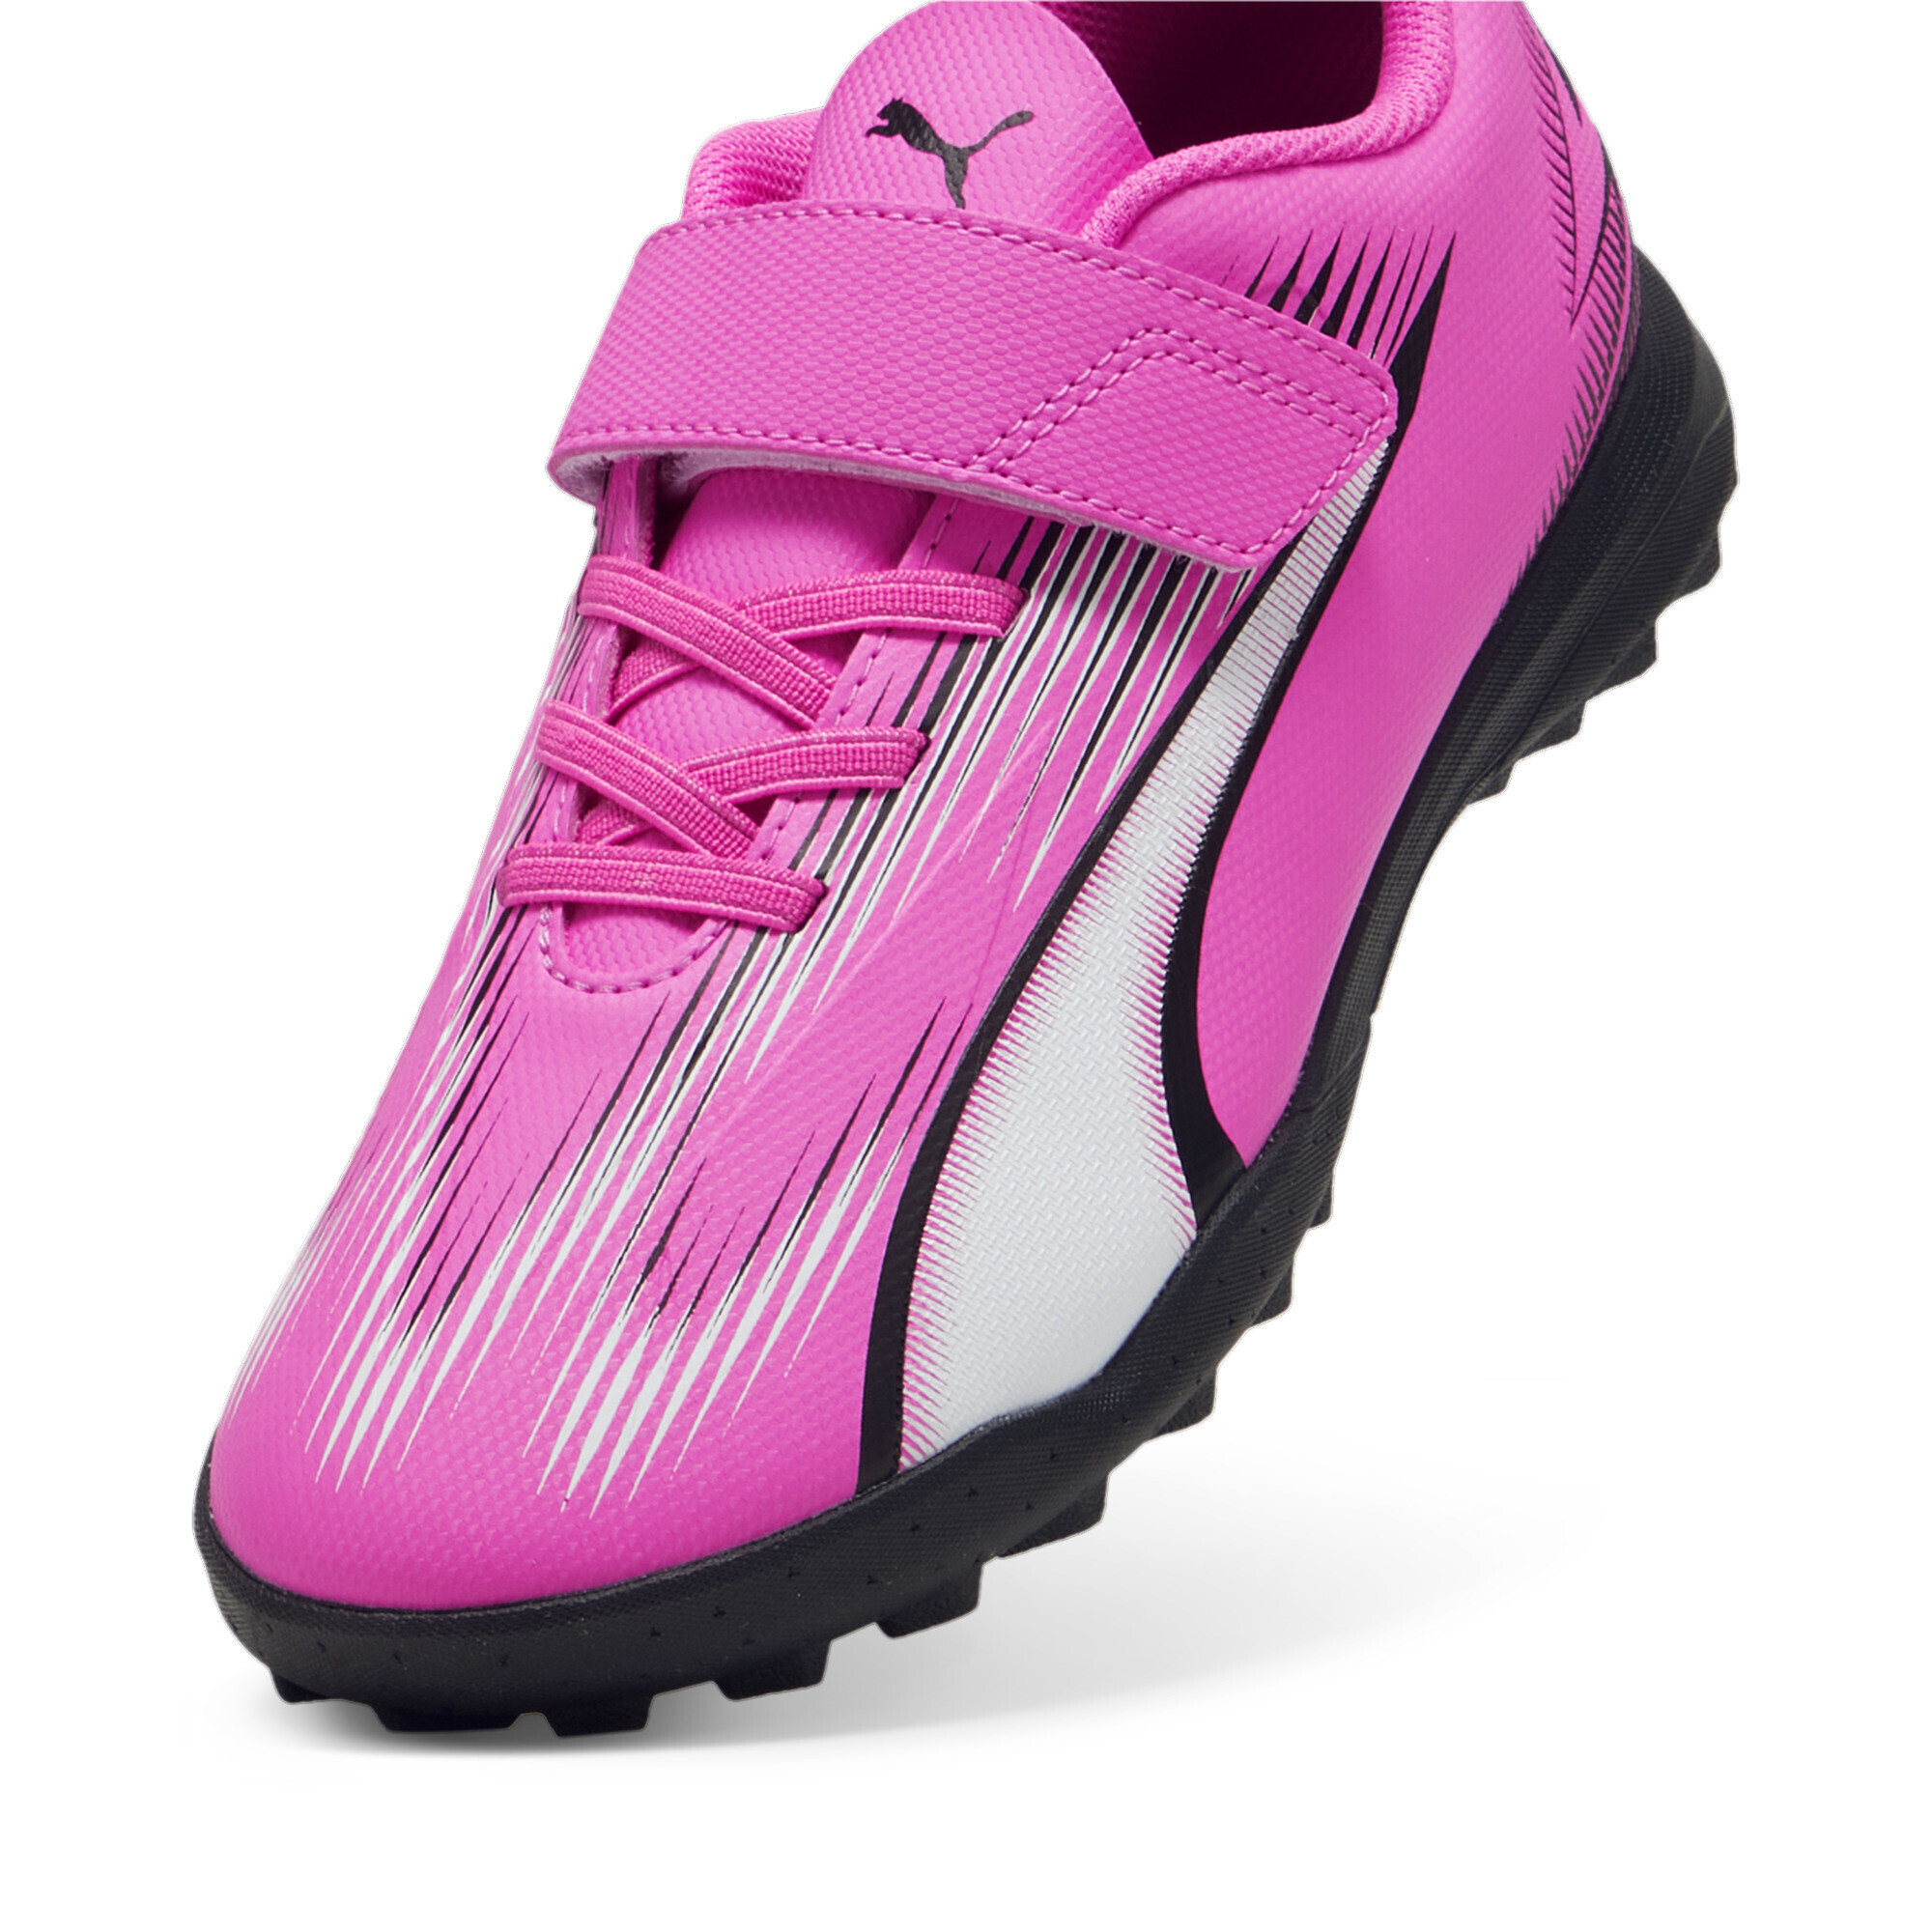 PUMA ULTRA PLAY TT Youth Football Boots In Pink, Size EU 32